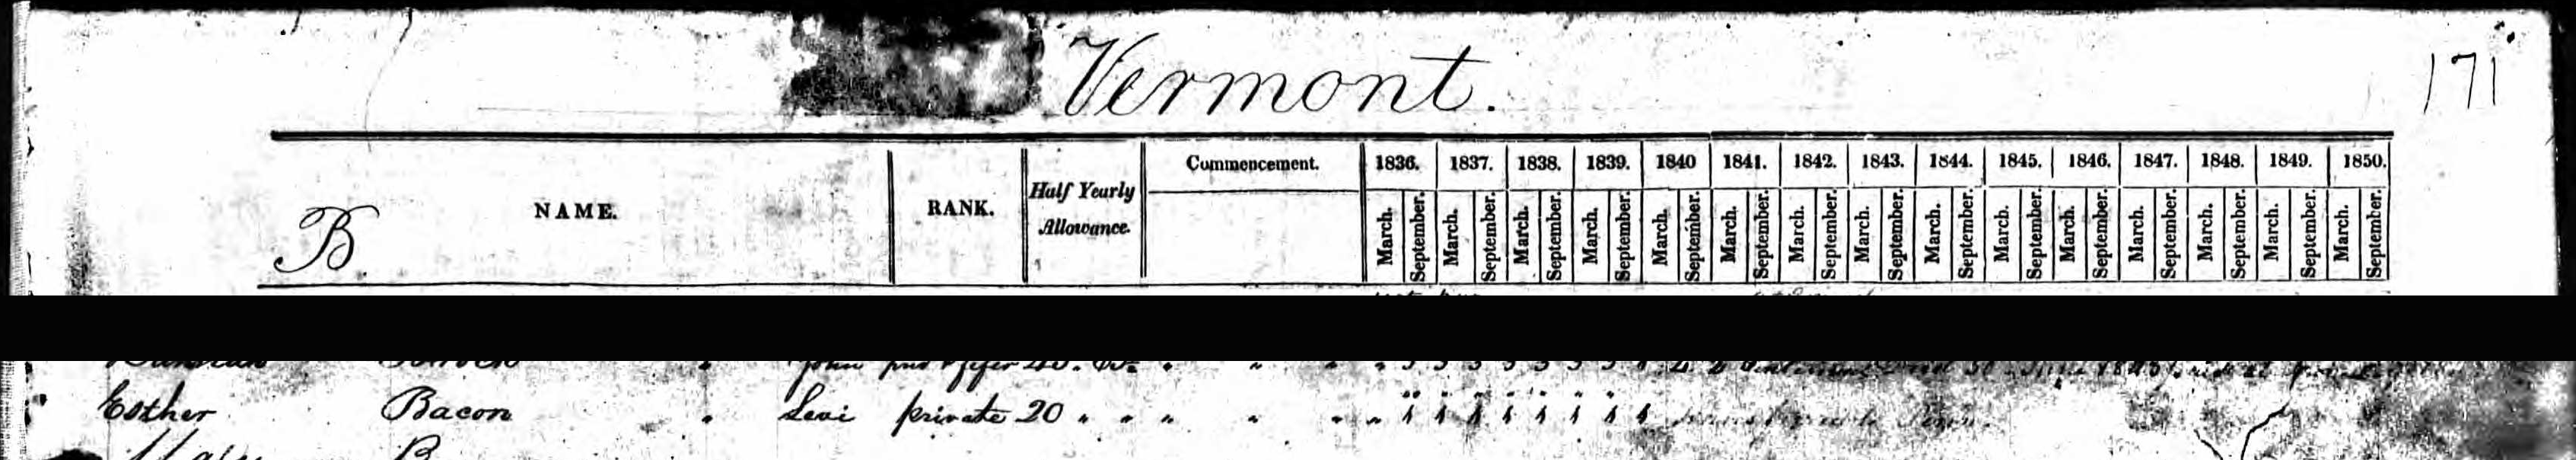 Pension record for Esther Bacon, wife of Levi